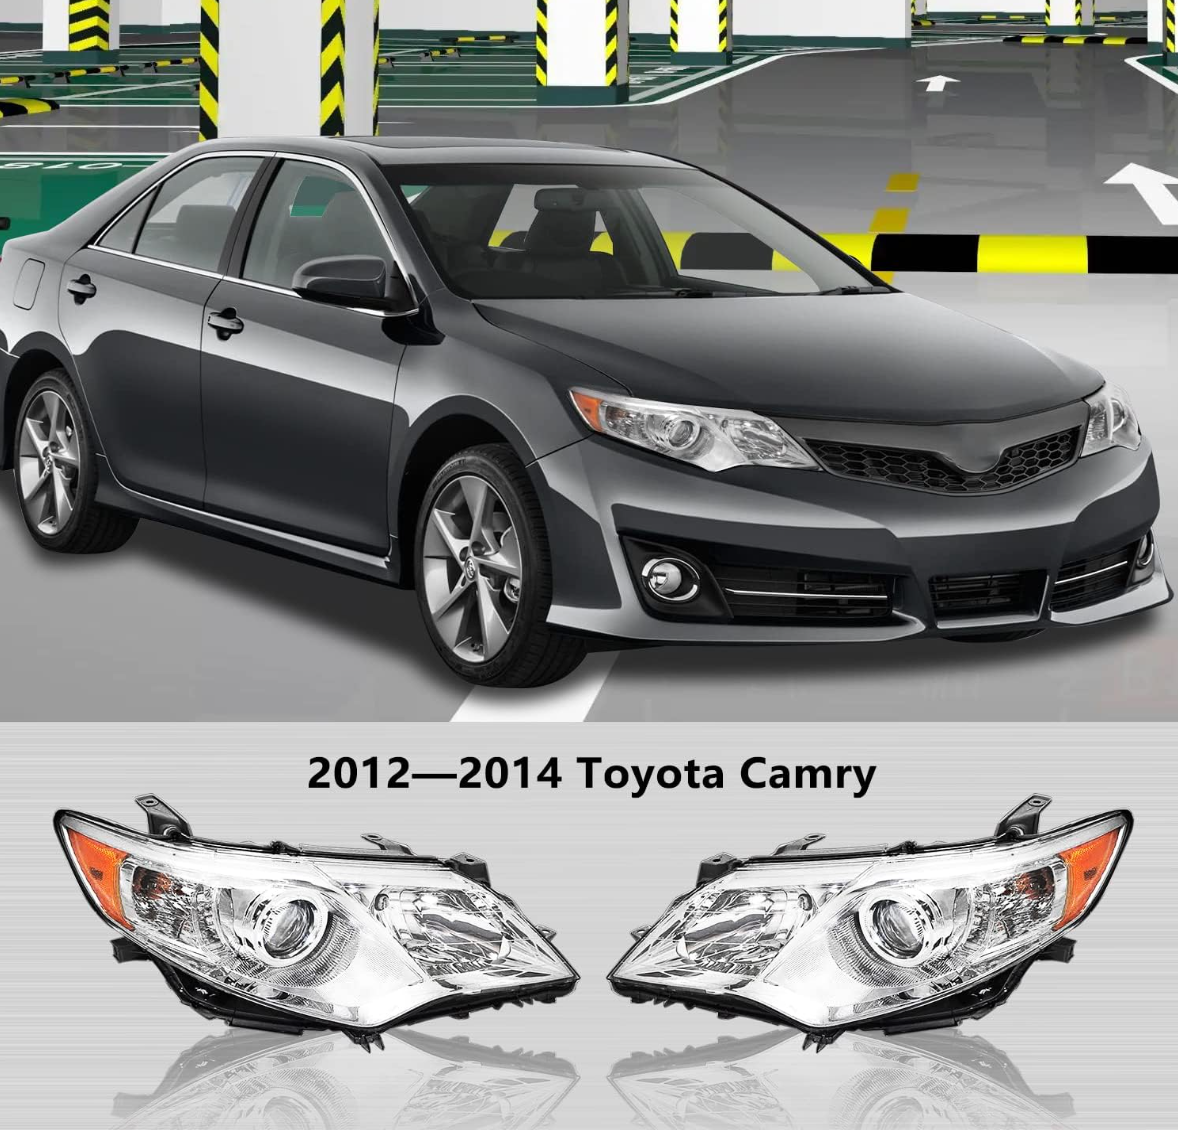 Headlights fit 2012 2013 2014 Camry Headlights, Headlamps with Chrome Housing Amber Reflector Clear Lens Replace Assembly Compatible Driver and Passenger Side Camry Headlights.